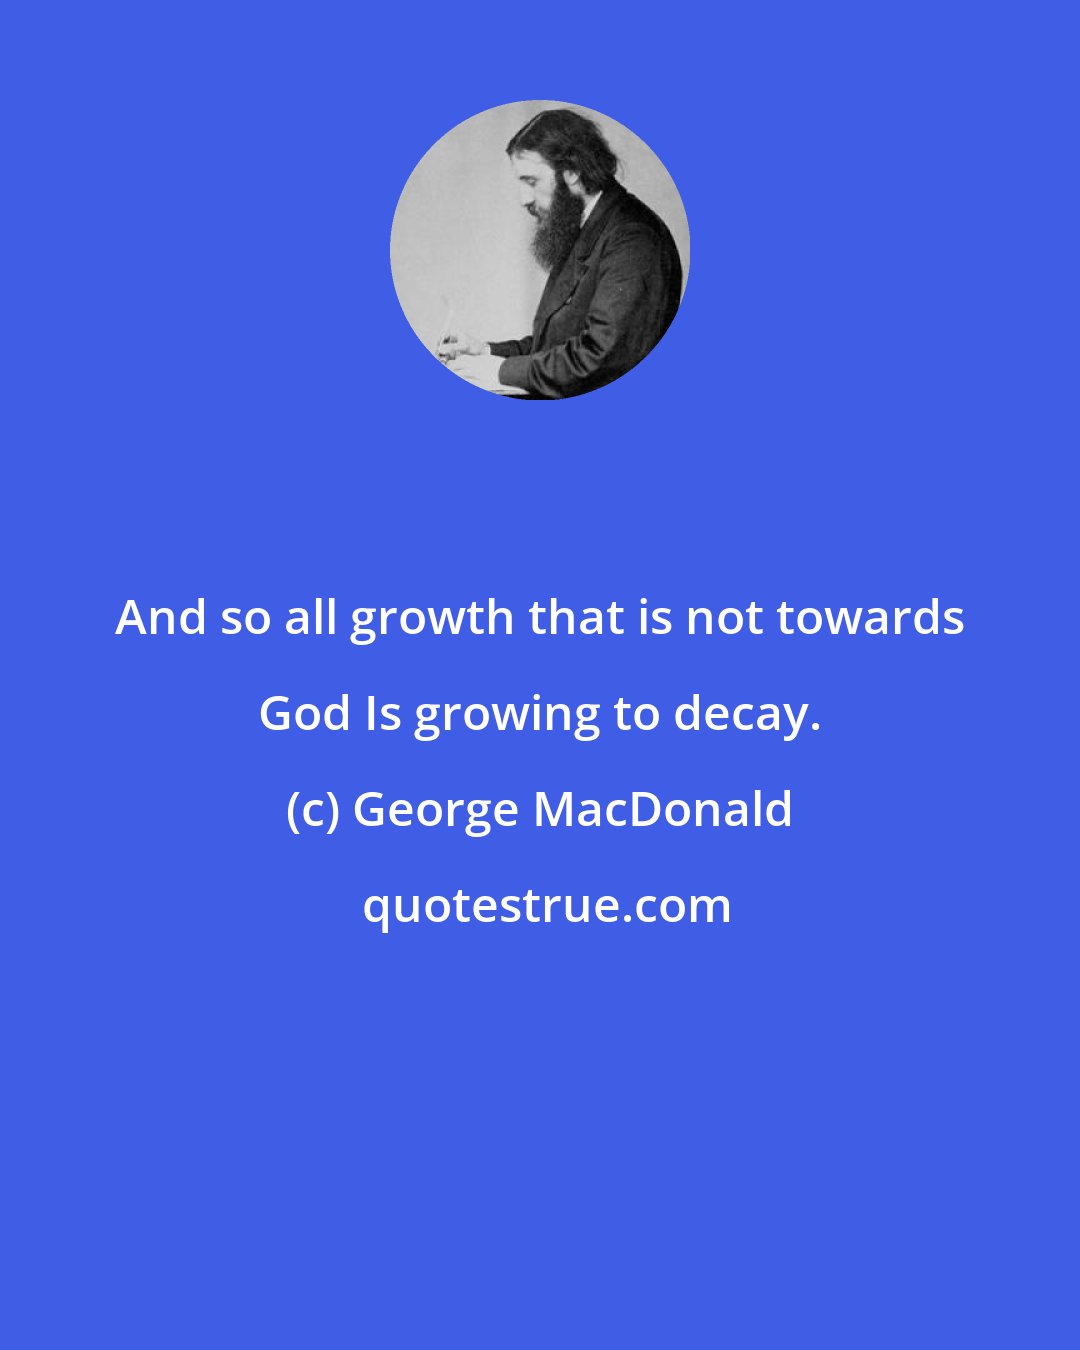 George MacDonald: And so all growth that is not towards God Is growing to decay.